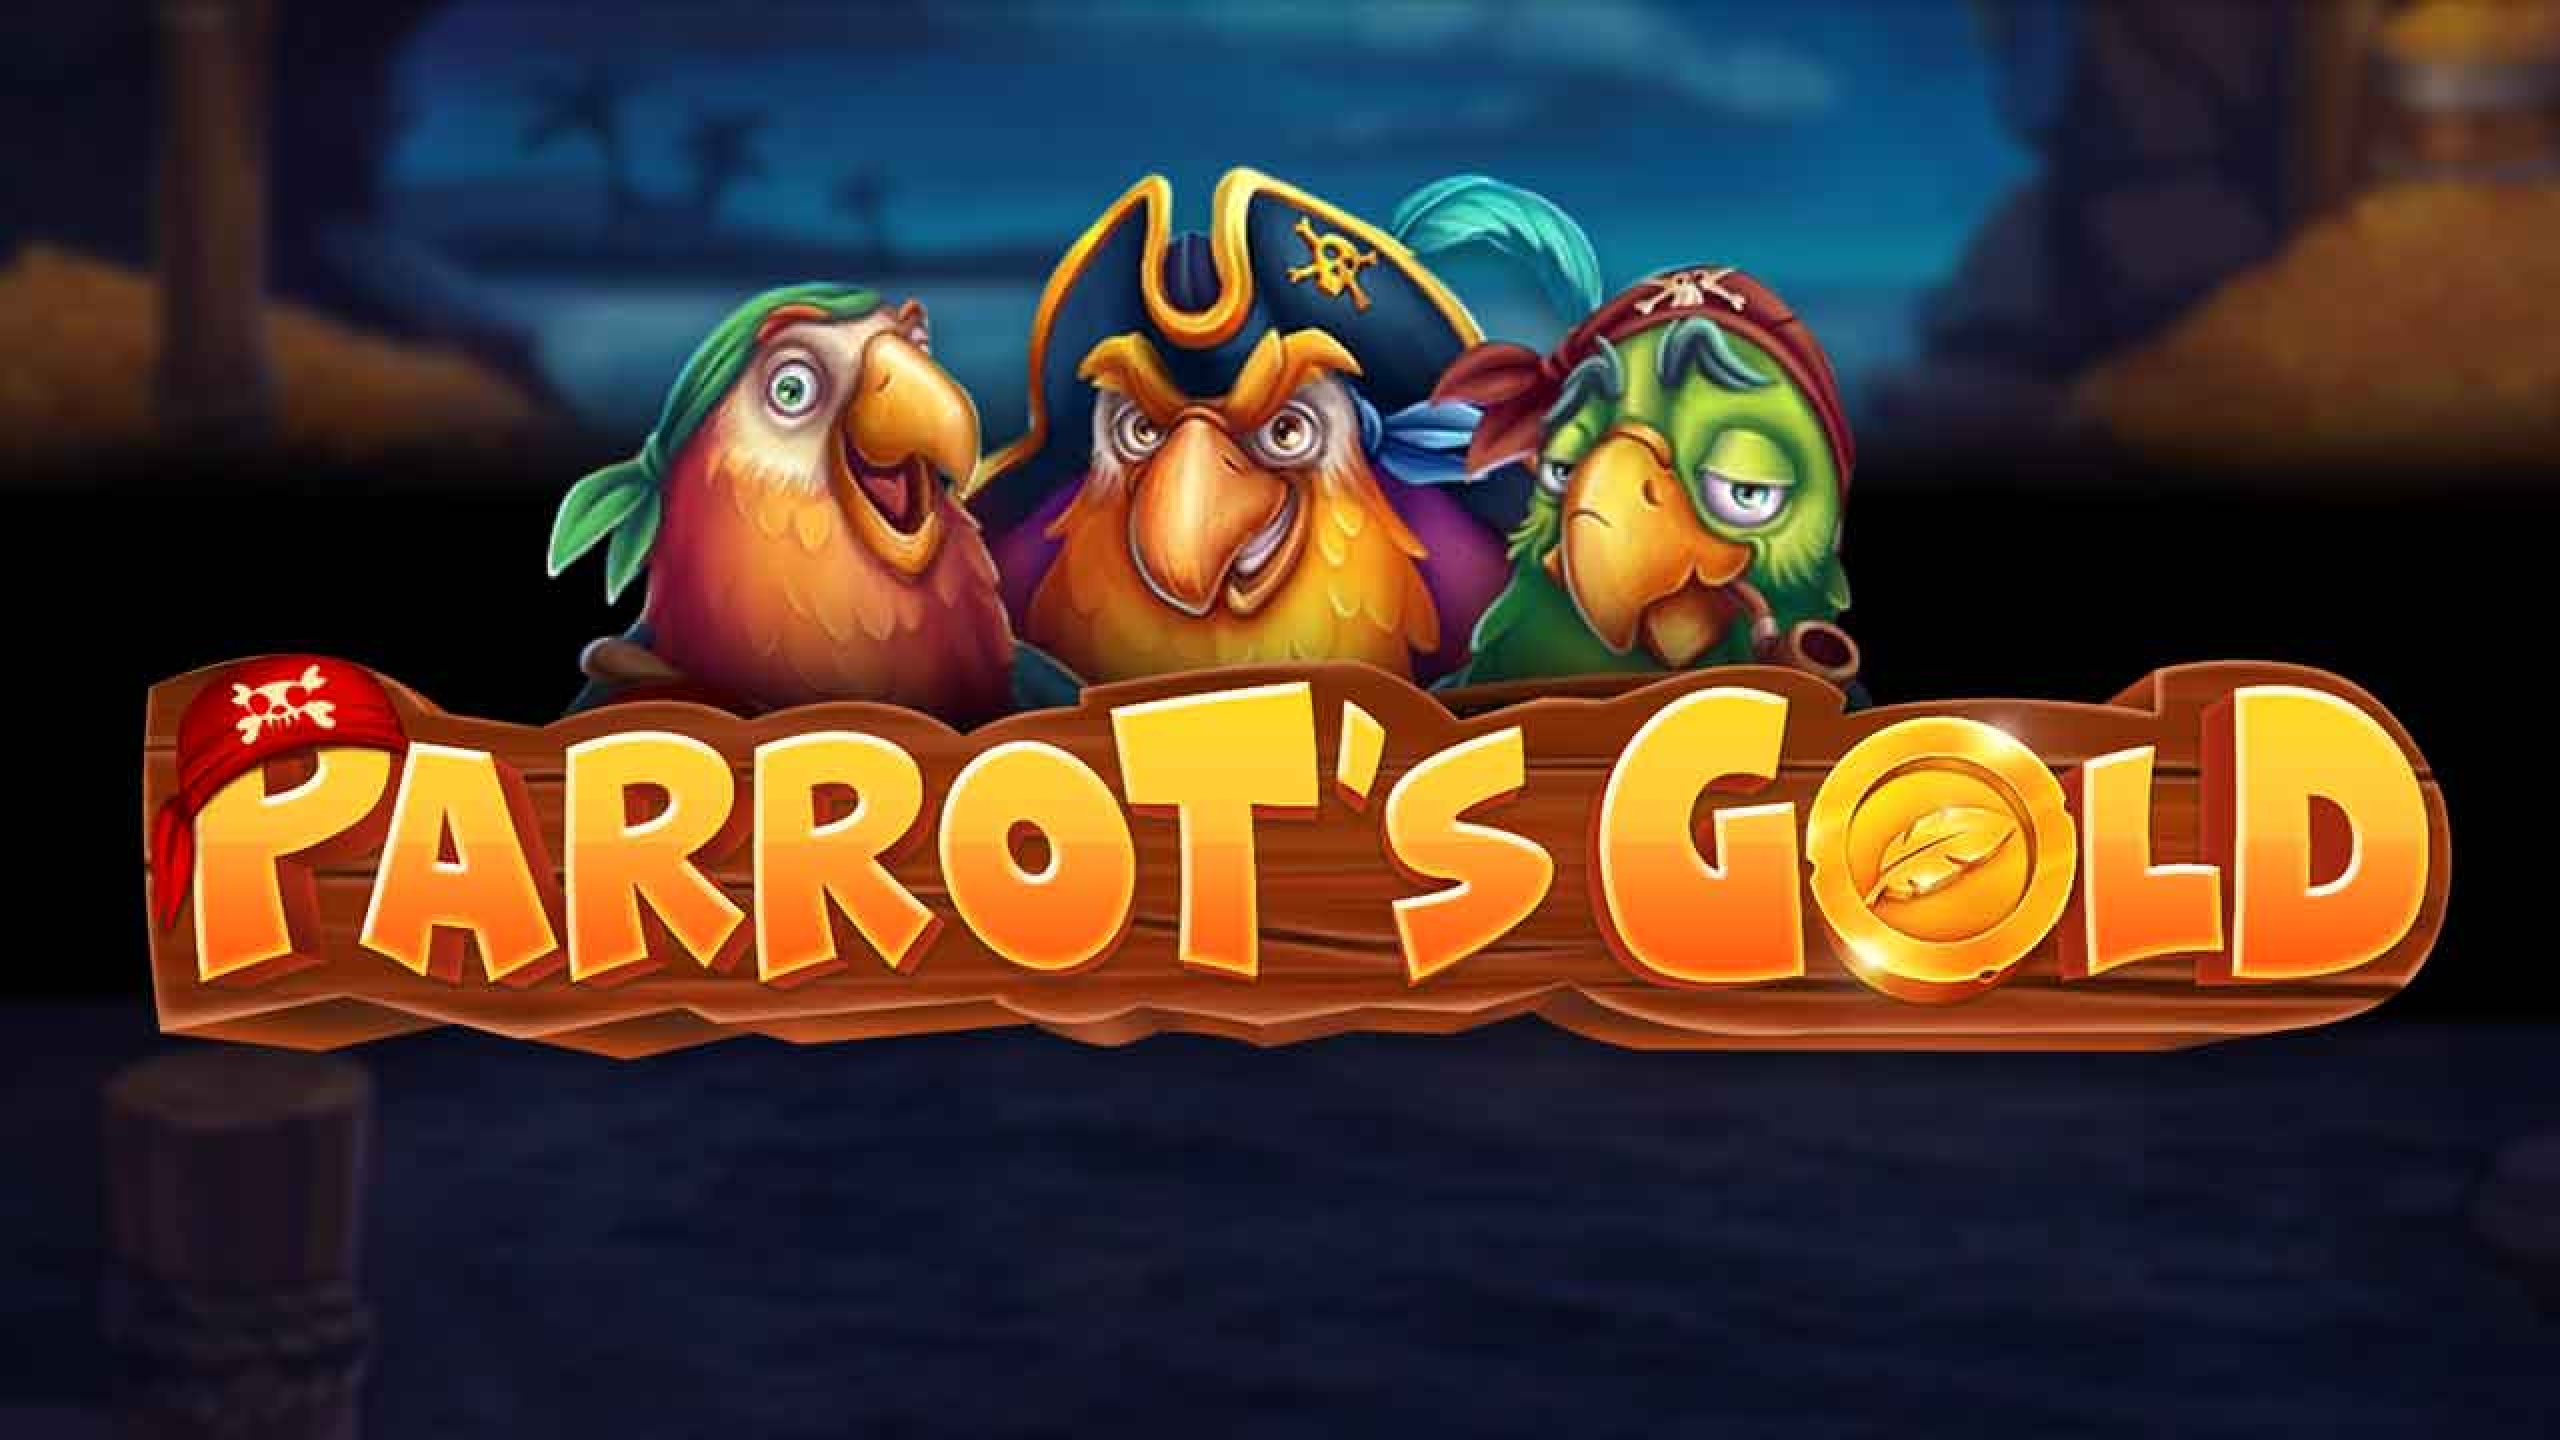 Parrot's Gold demo